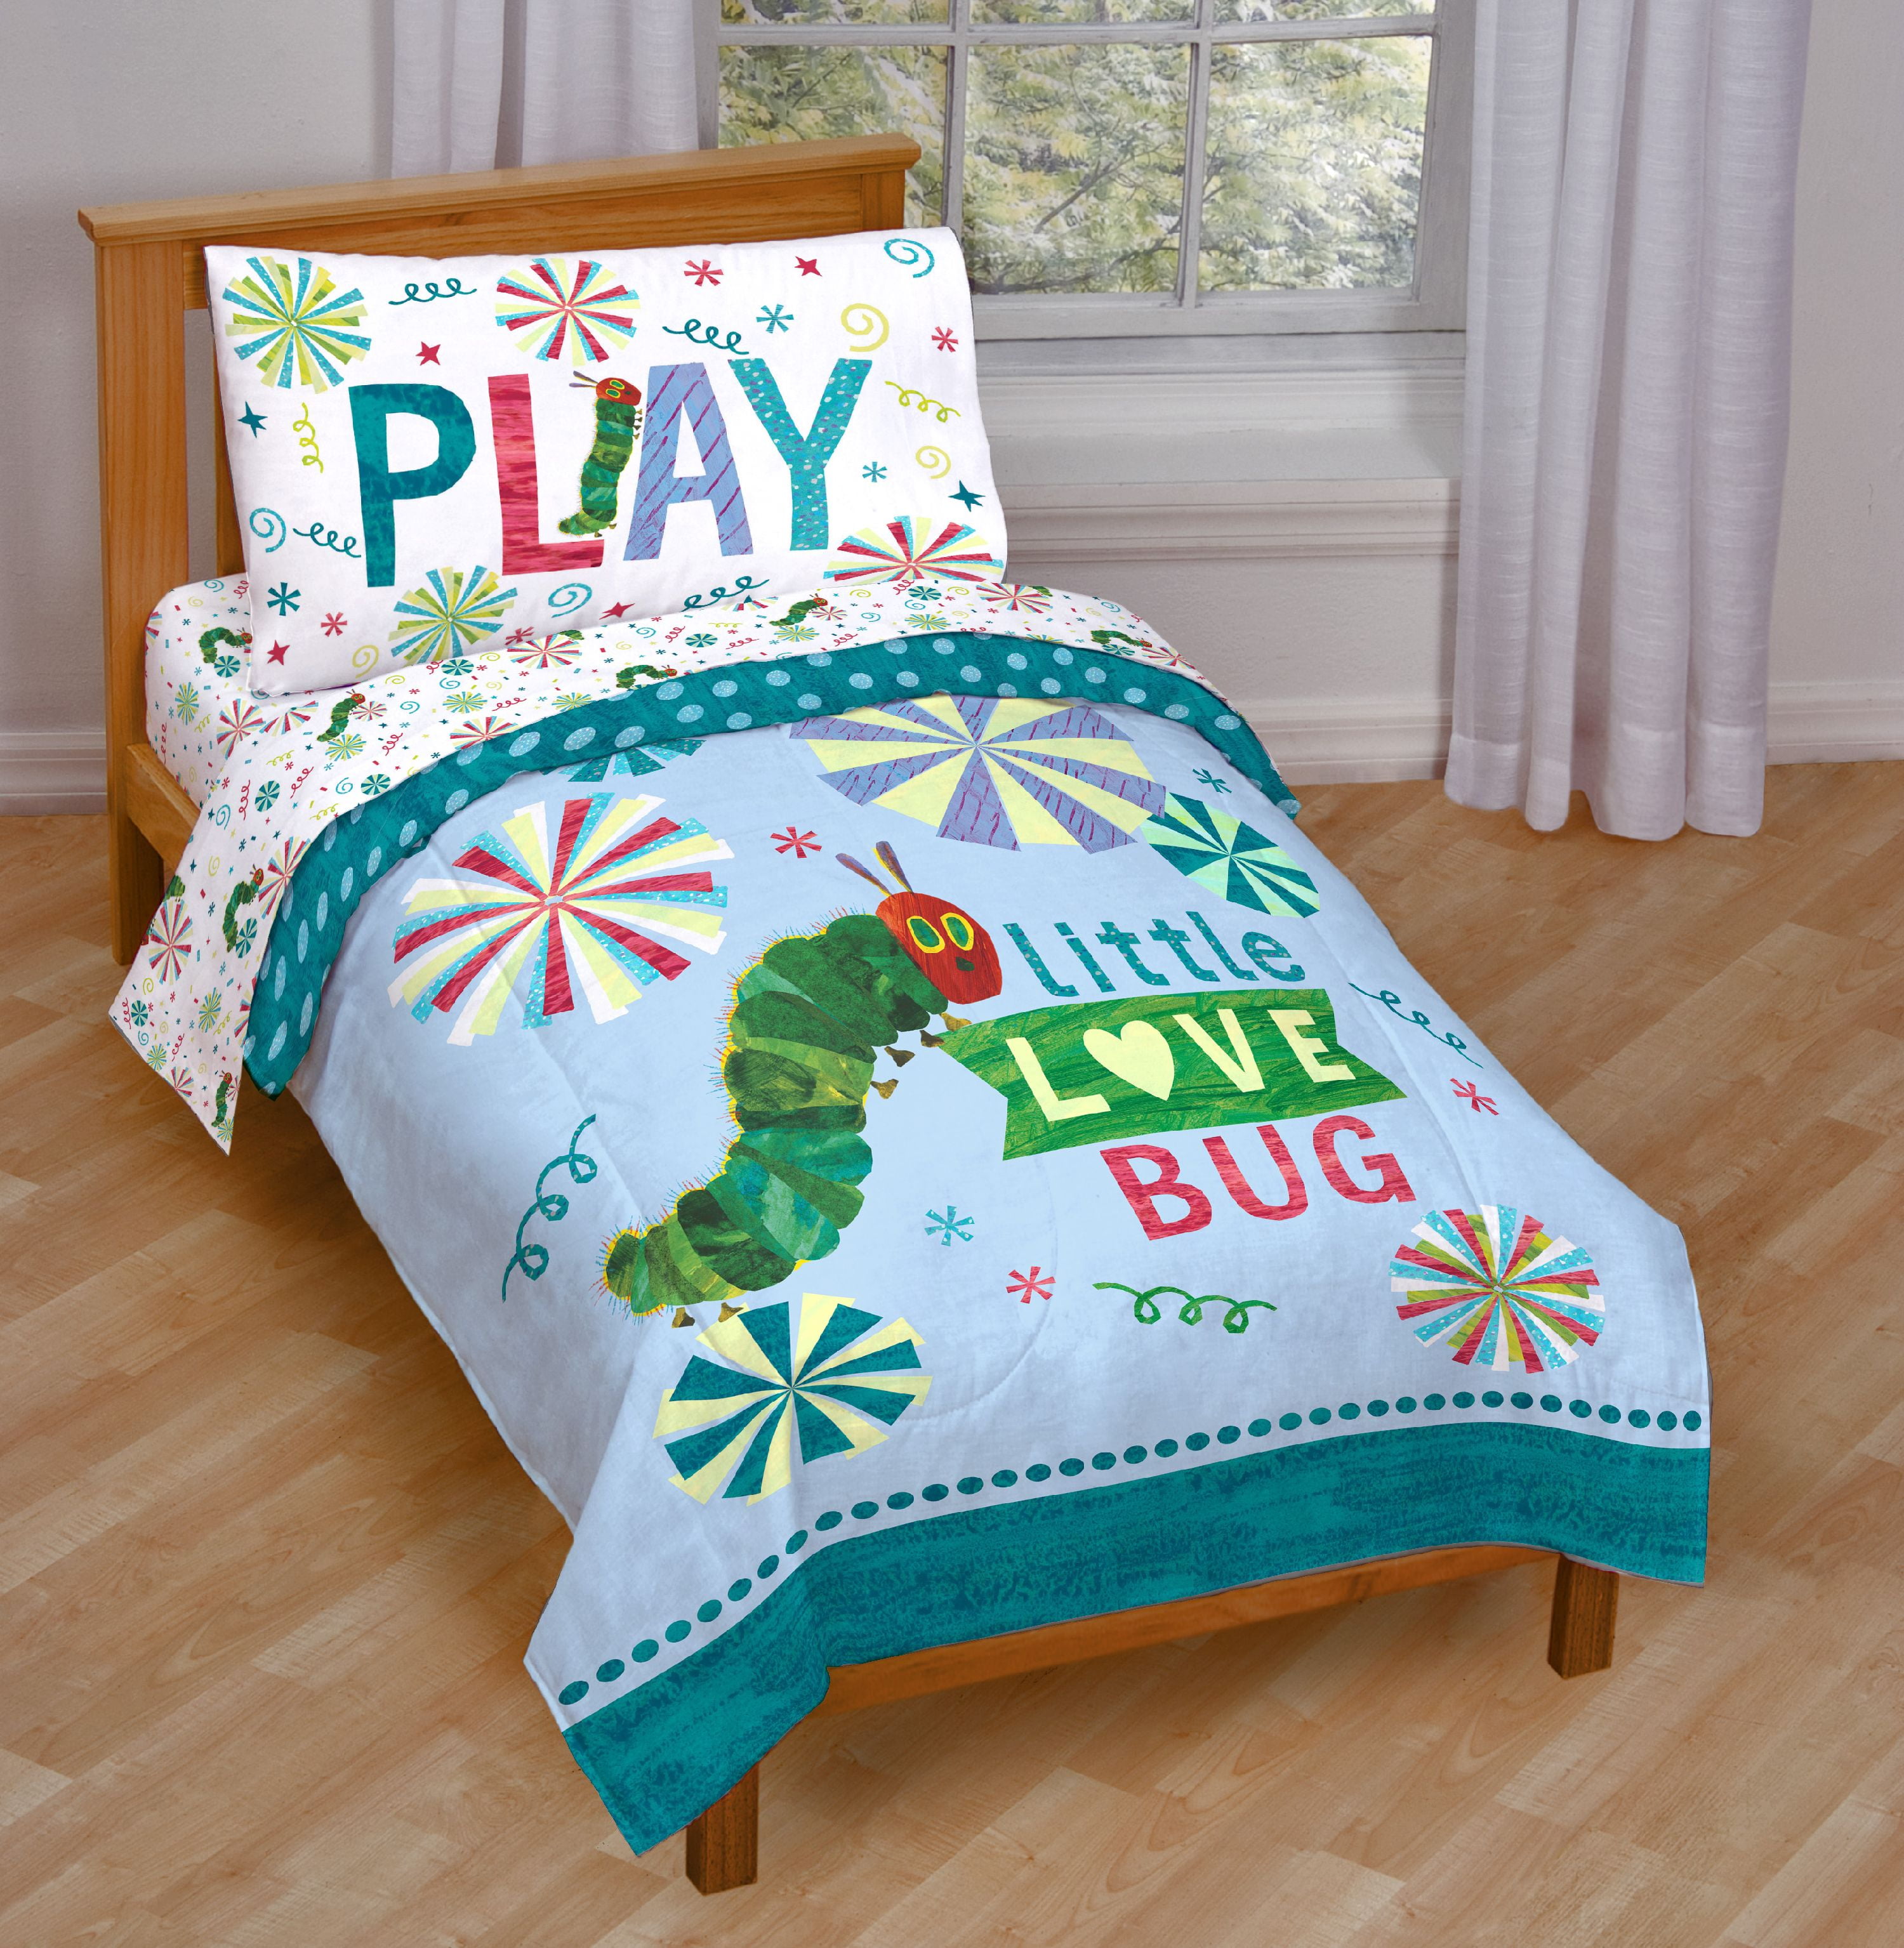 The Very Hungry Caterpillar *NEW* BEDDING SET all sizes available 